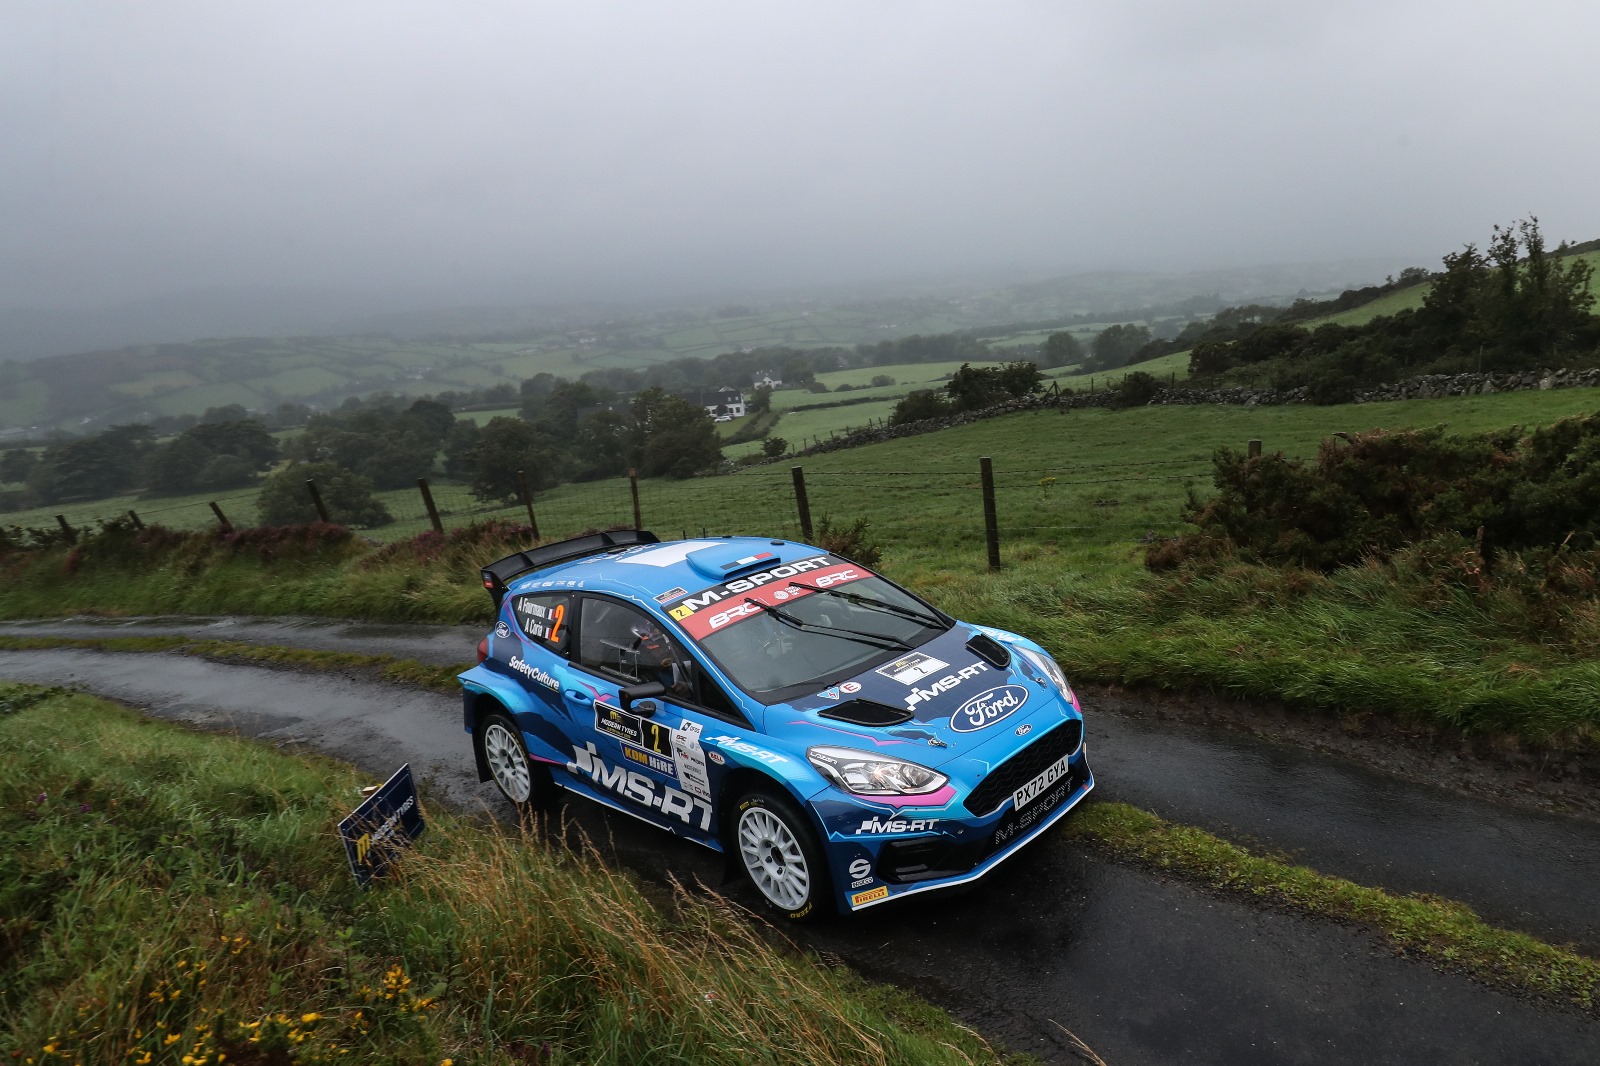 BRC: FOURMAUX’S UNSTOPPABLE ULSTER RALLY WIN